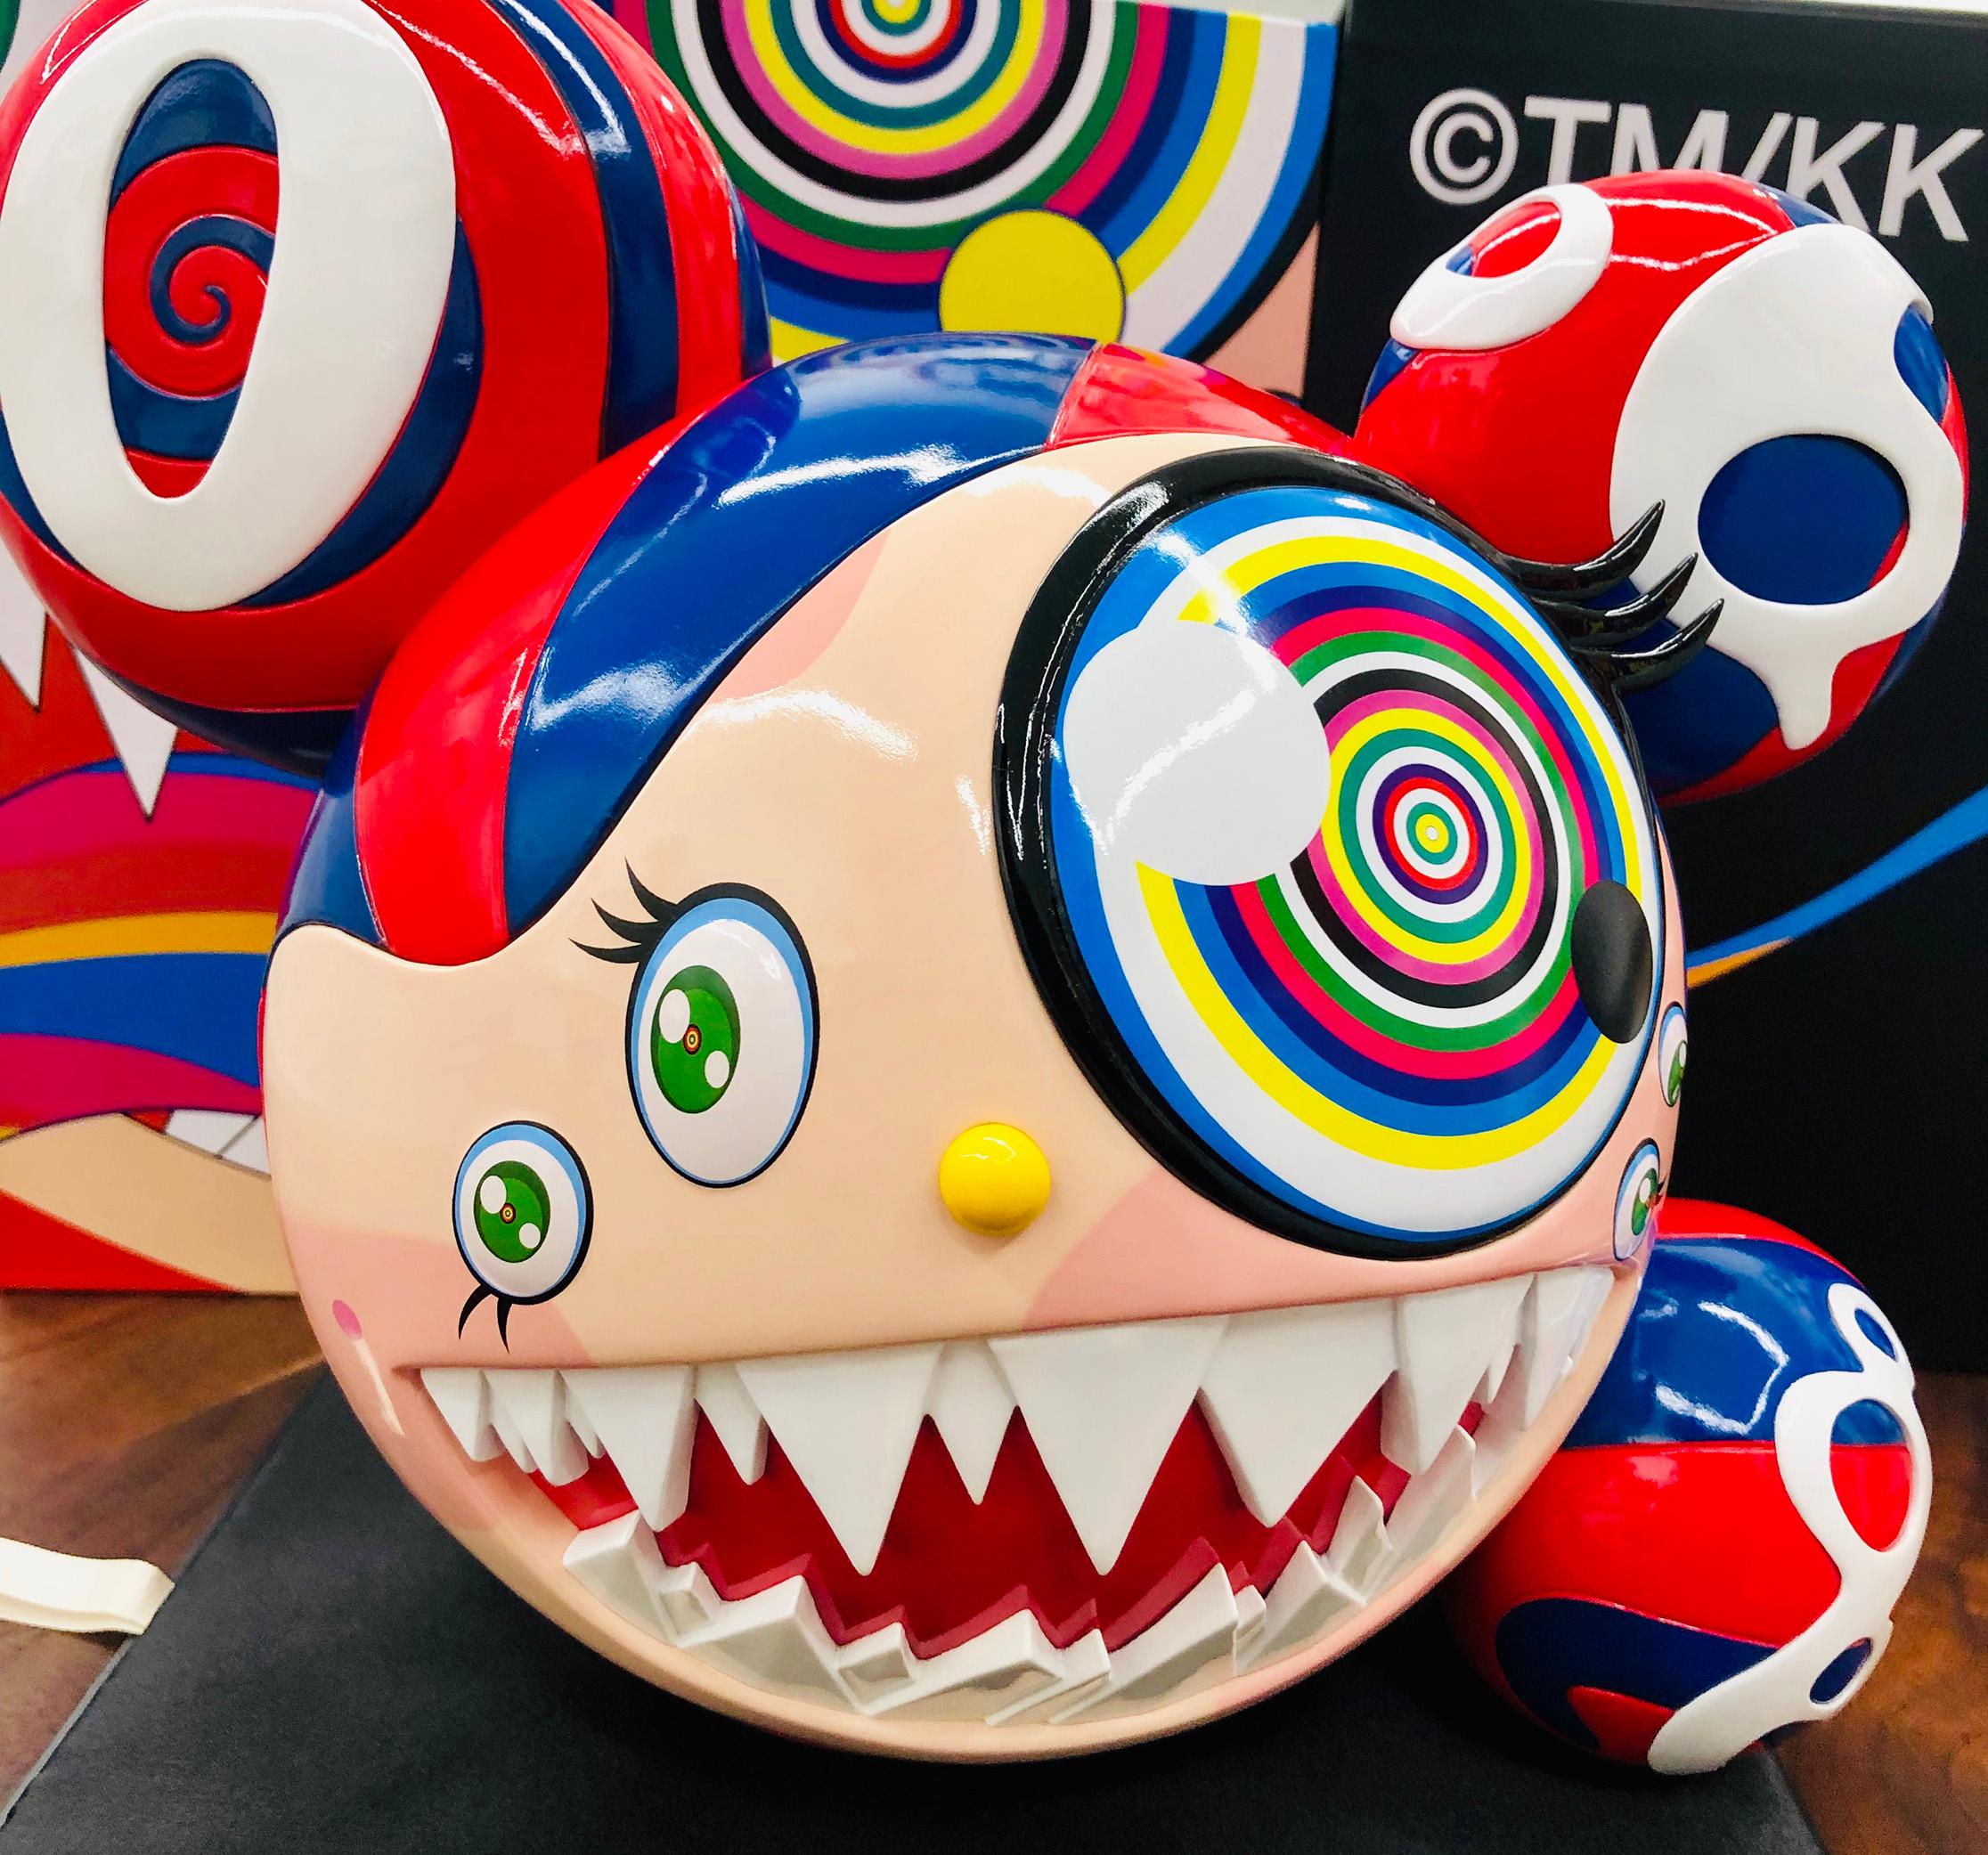 Takashi Murakami Mr. DOB, 2016:
Takashi Murakami limited edition 2016 Mr. DOB figure. 

Medium: Painted cast vinyl figurine. Colors: Red & Blue. 
Figurine: 9.25 x 10.75 x 8 in (23.5 x 27.43 x 20.32 cm). 
Edition of 750. 
All elements appear to be in